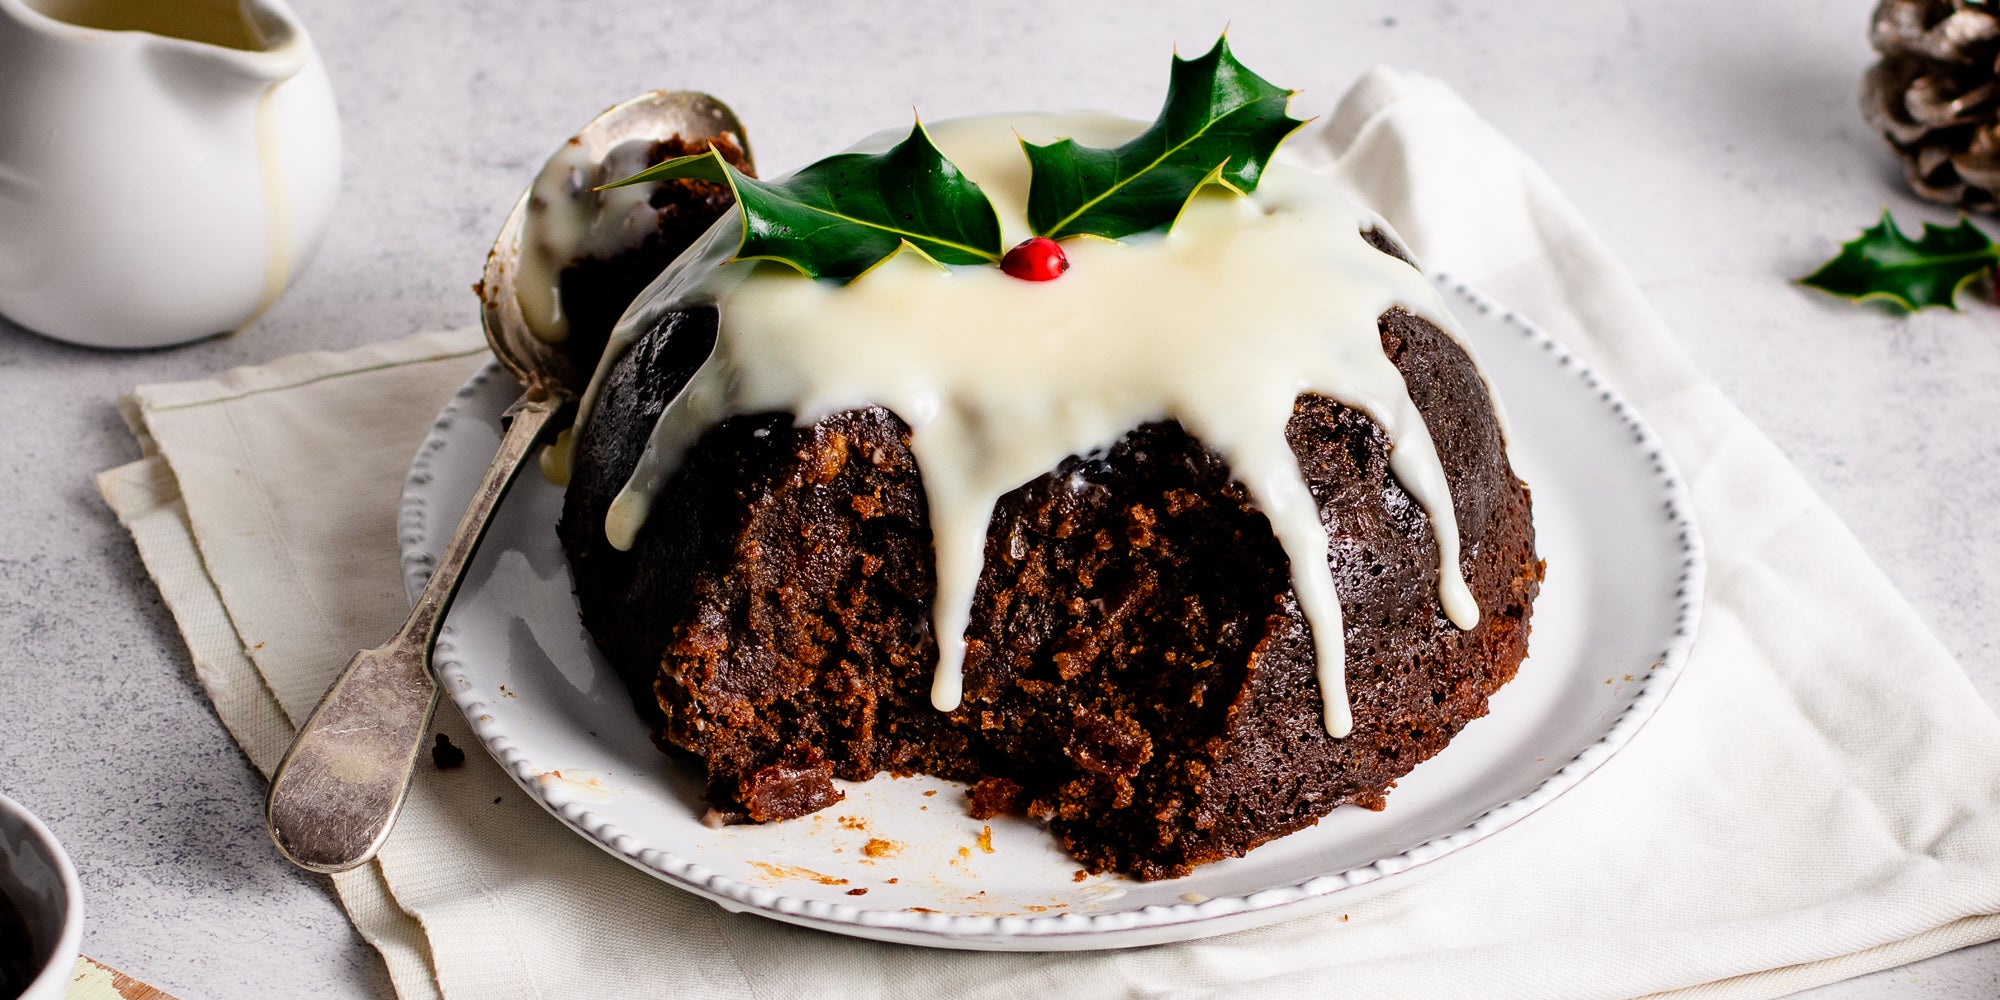 Close up of Last Minute Christmas Pudding drizzled with cream or brandy butter, with a decorative piece of holly ontop